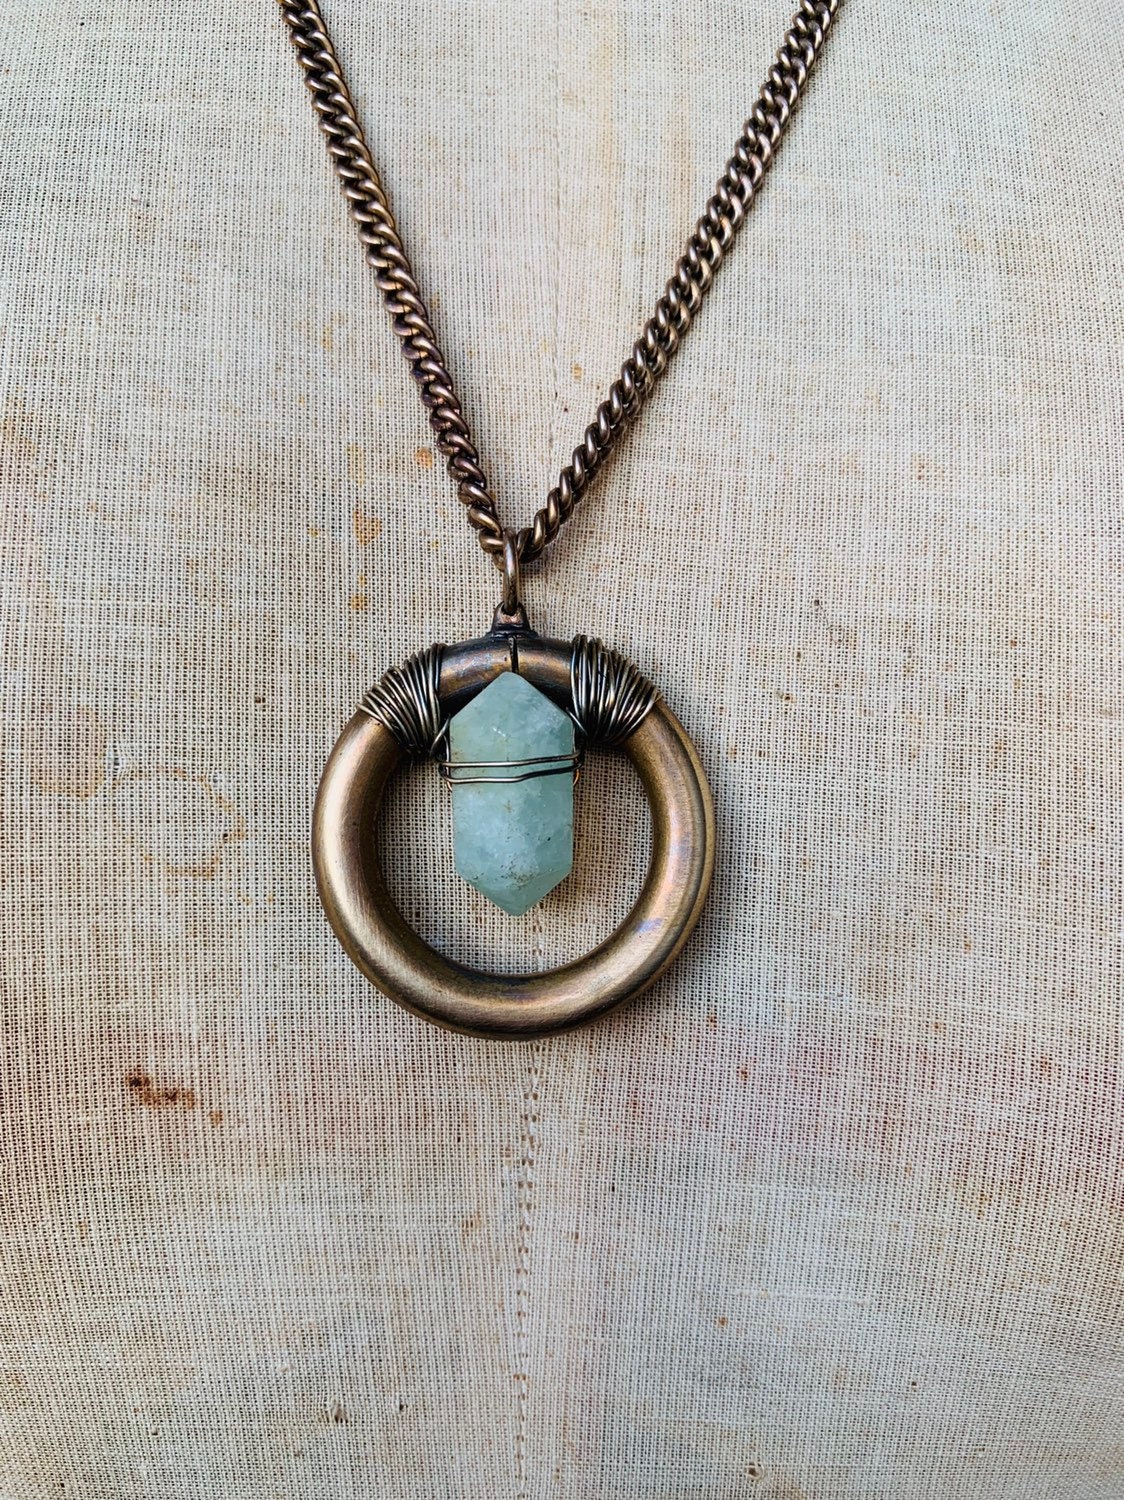 Crystal Necklace / Prehnite Point / Crystal Pendant / Healing Crystal ...